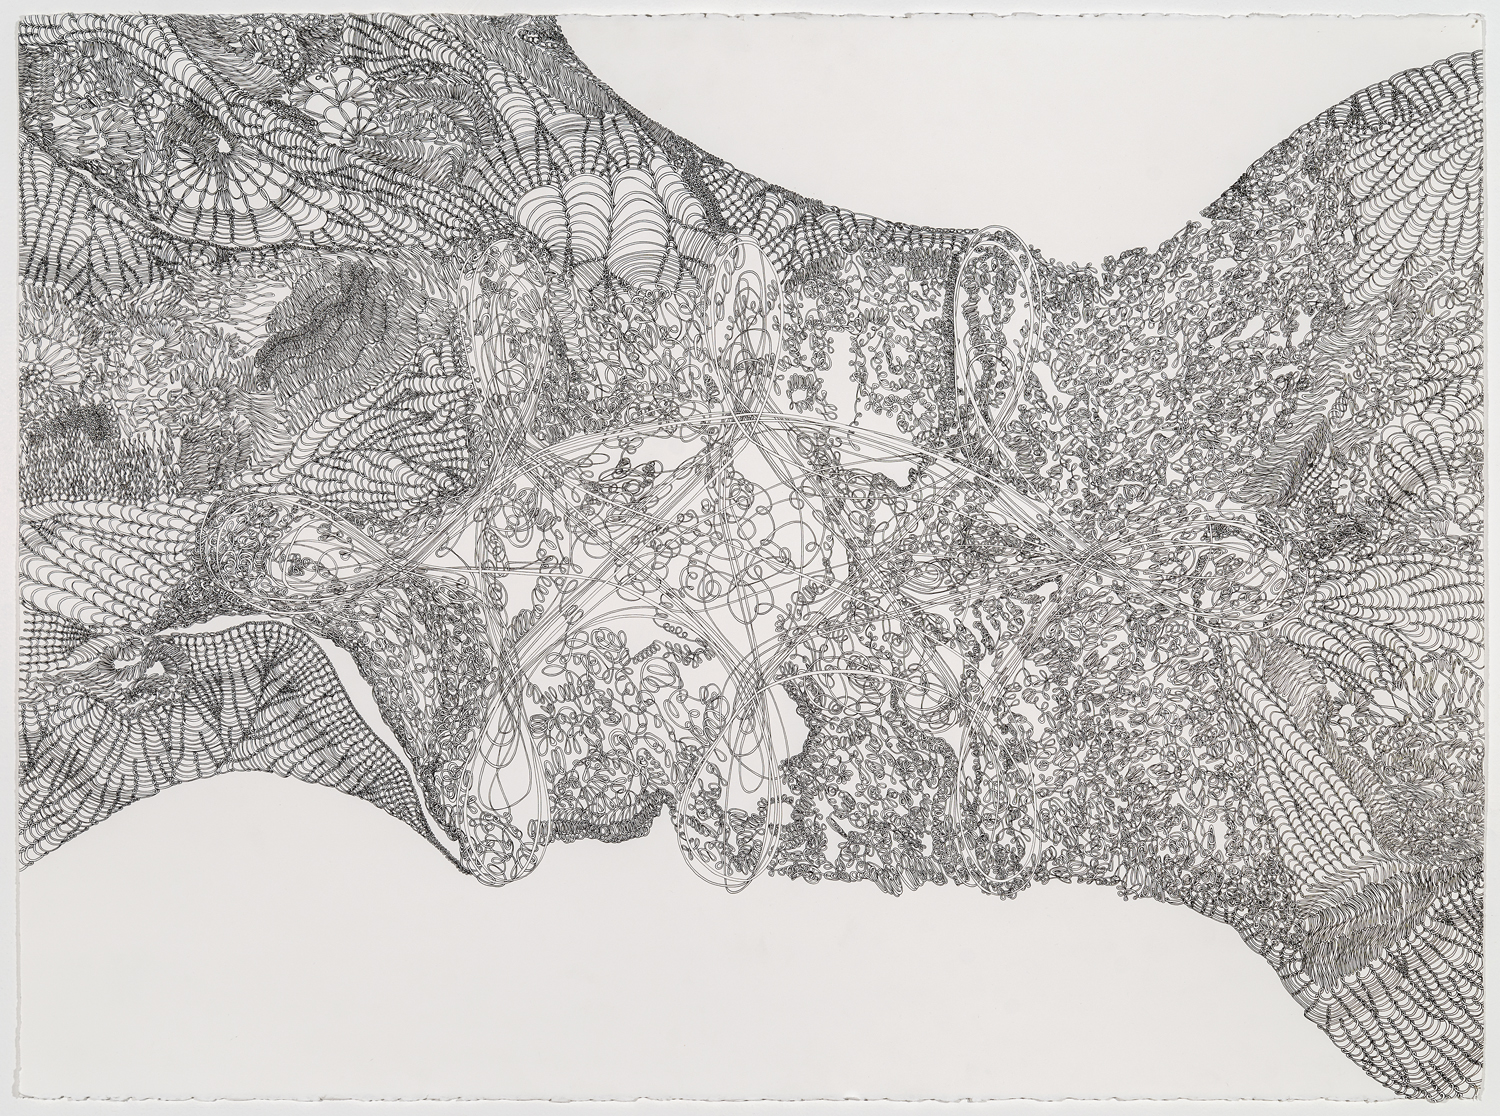 Within Bounds, ink on paper, 30 x 22.5 inches, 2015